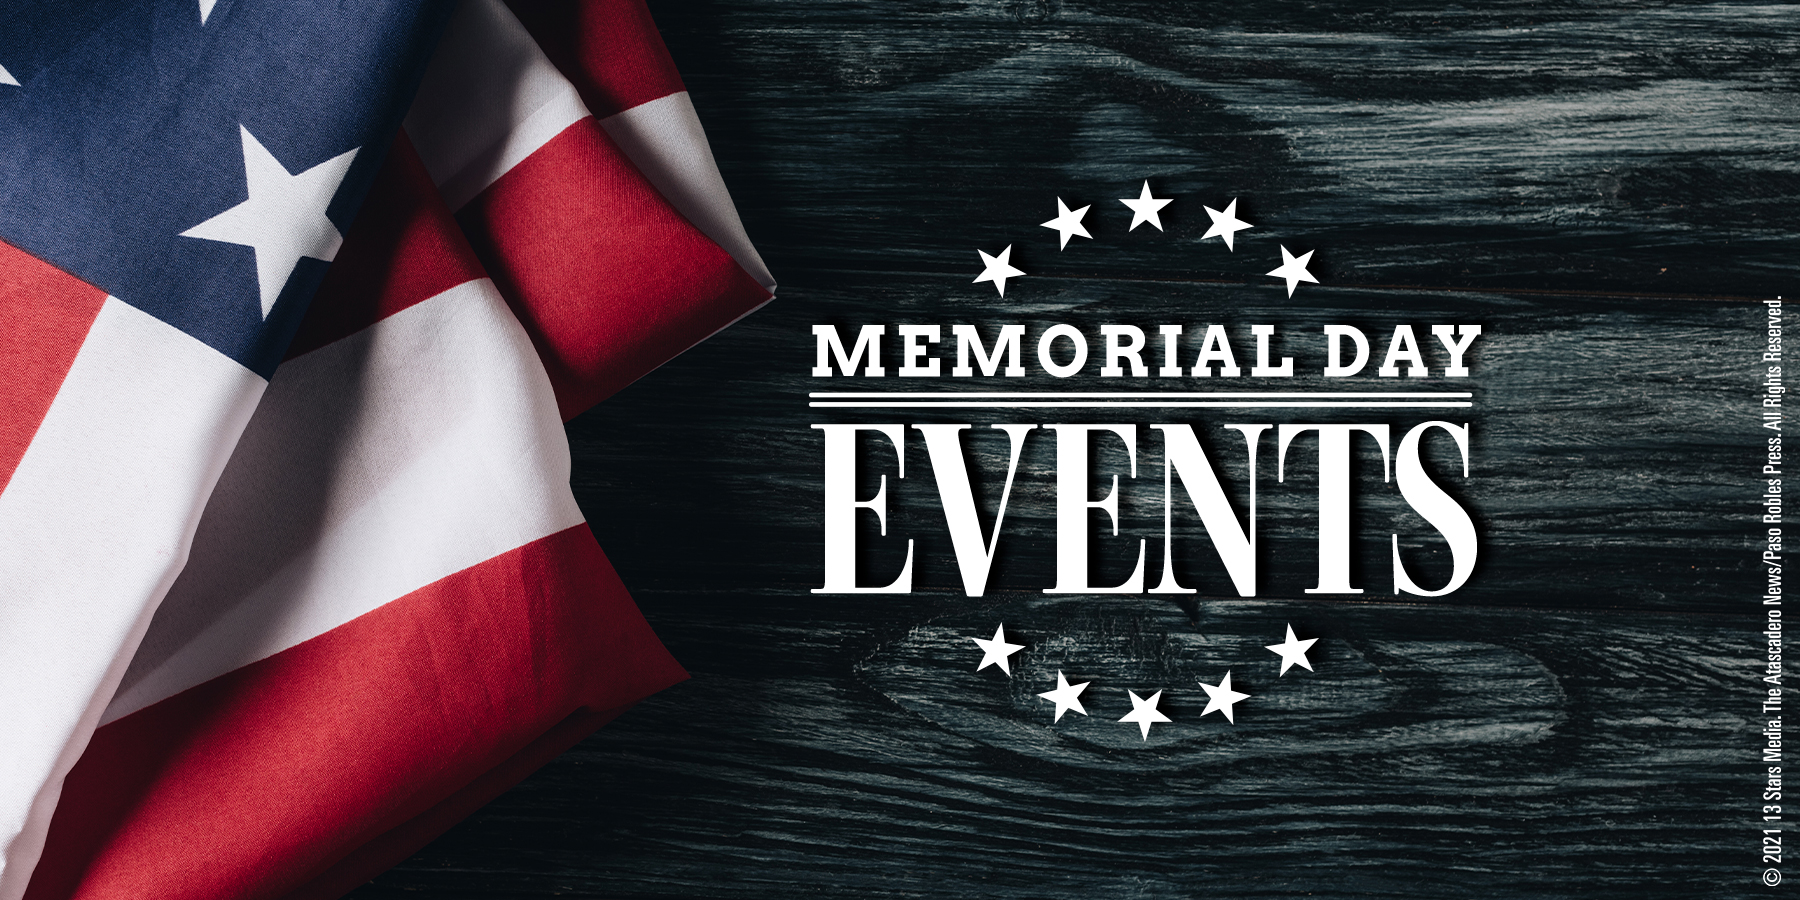 SLO County Memorial Day Weekend Events • Atascadero News